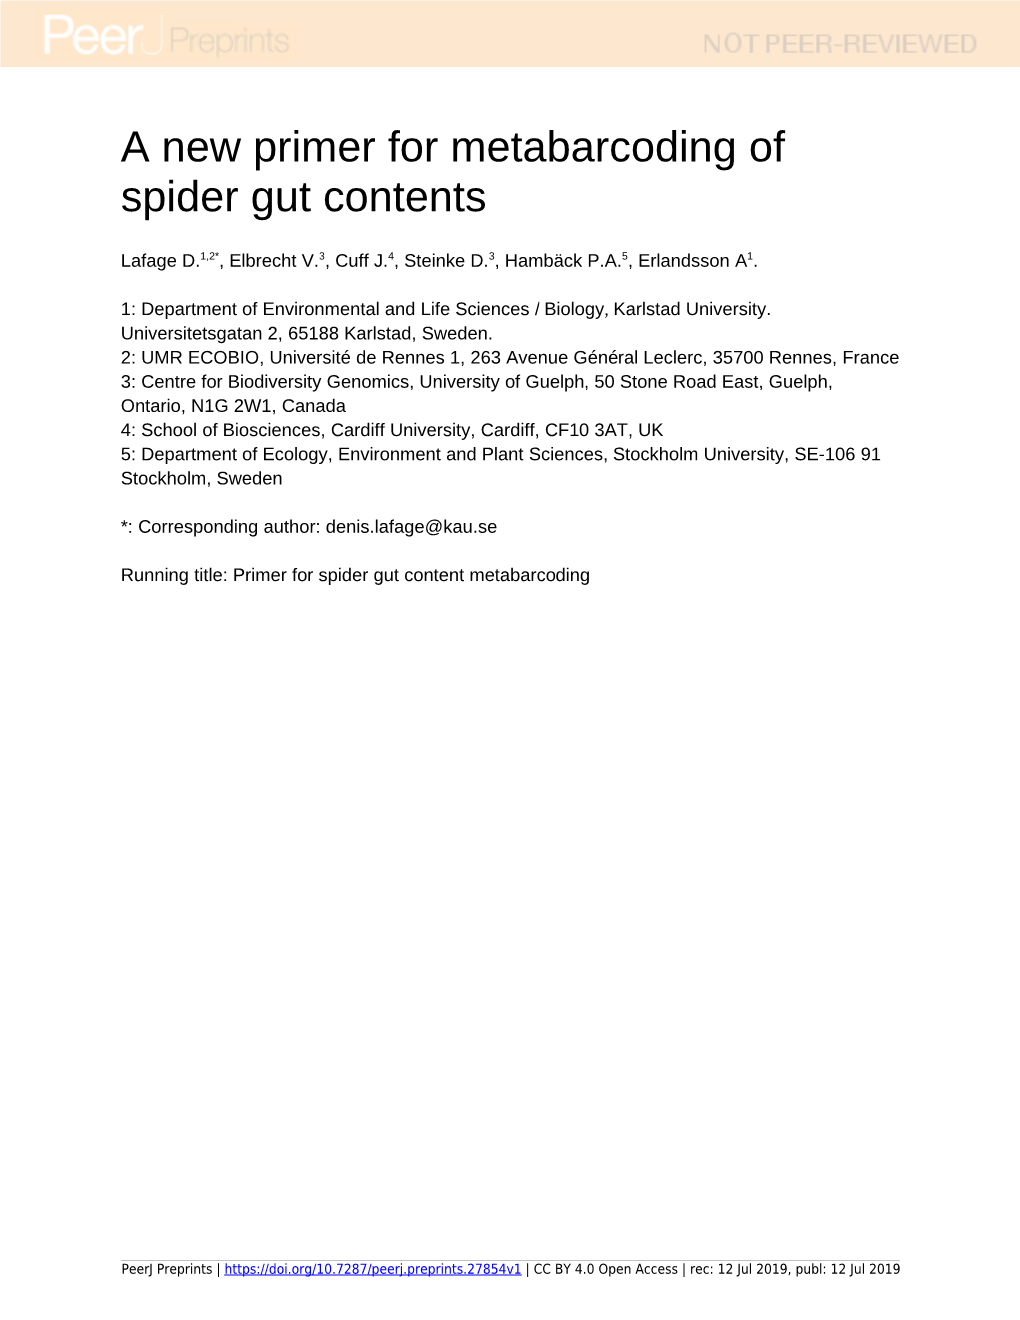 A New Primer for Metabarcoding of Spider Gut Contents